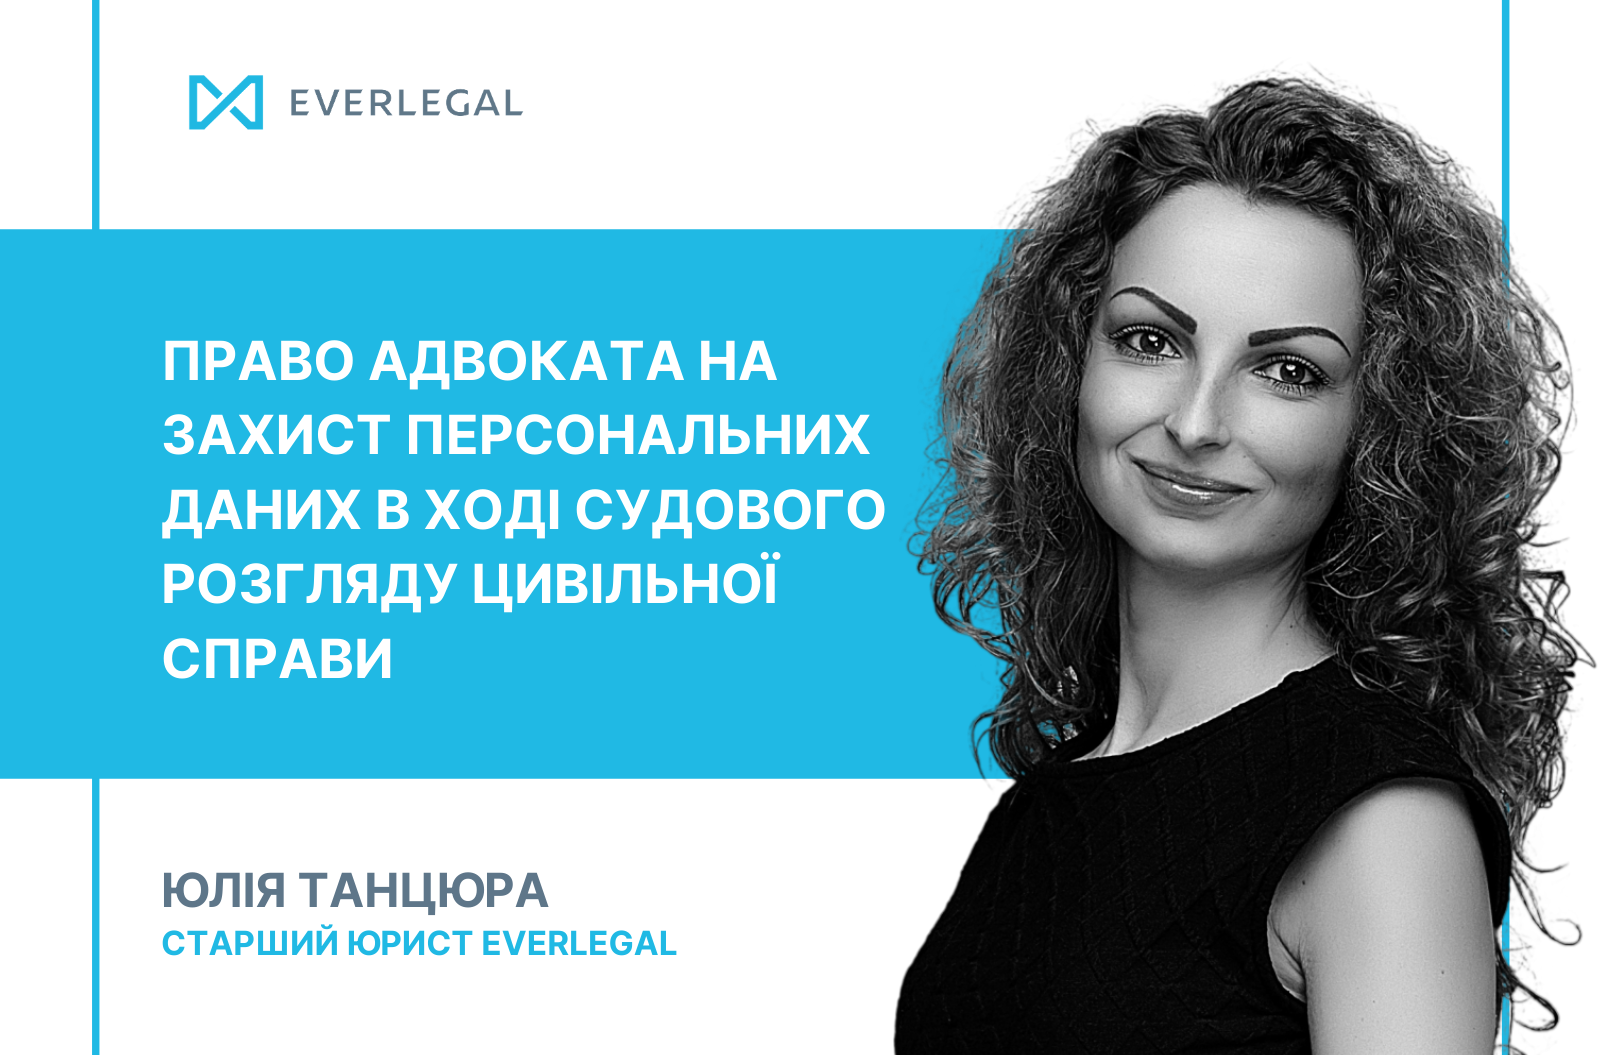 The lawyer's right to the protection of personal data during civil proceedings